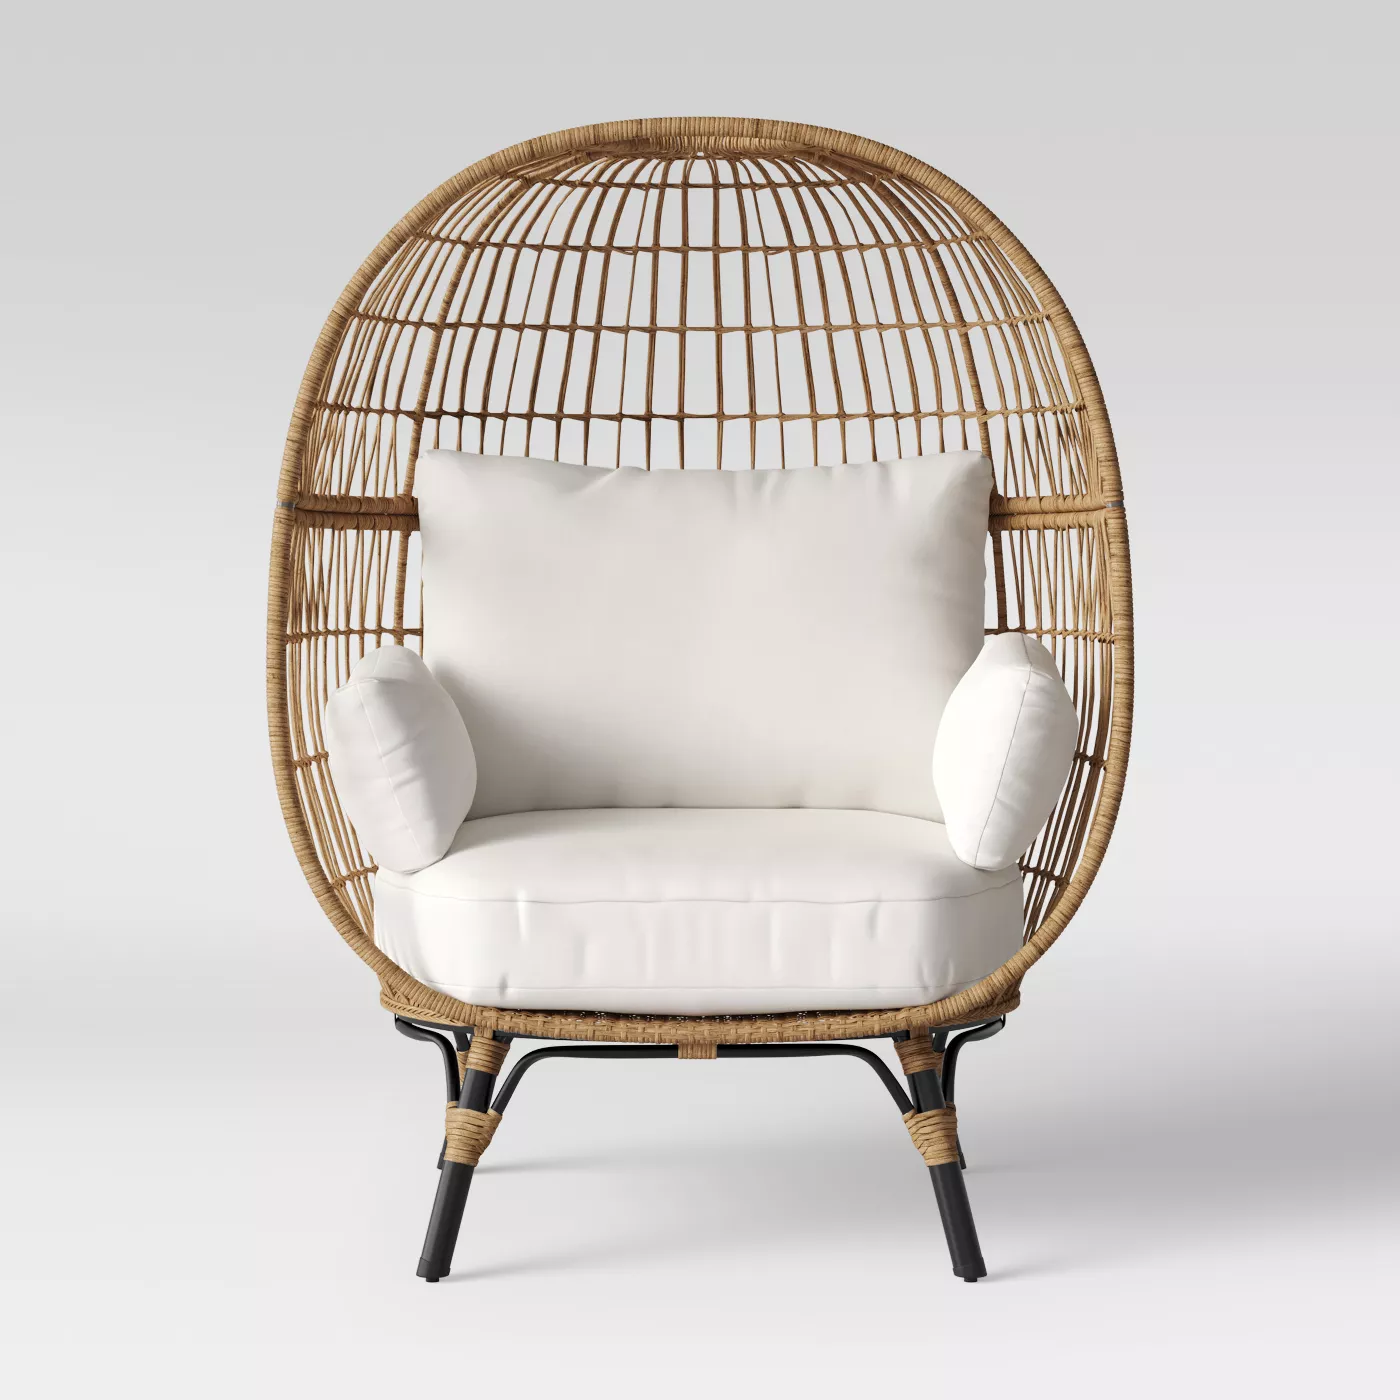 Southport Patio Egg Chair - Opalhouseâ„¢ - image 1 of 12